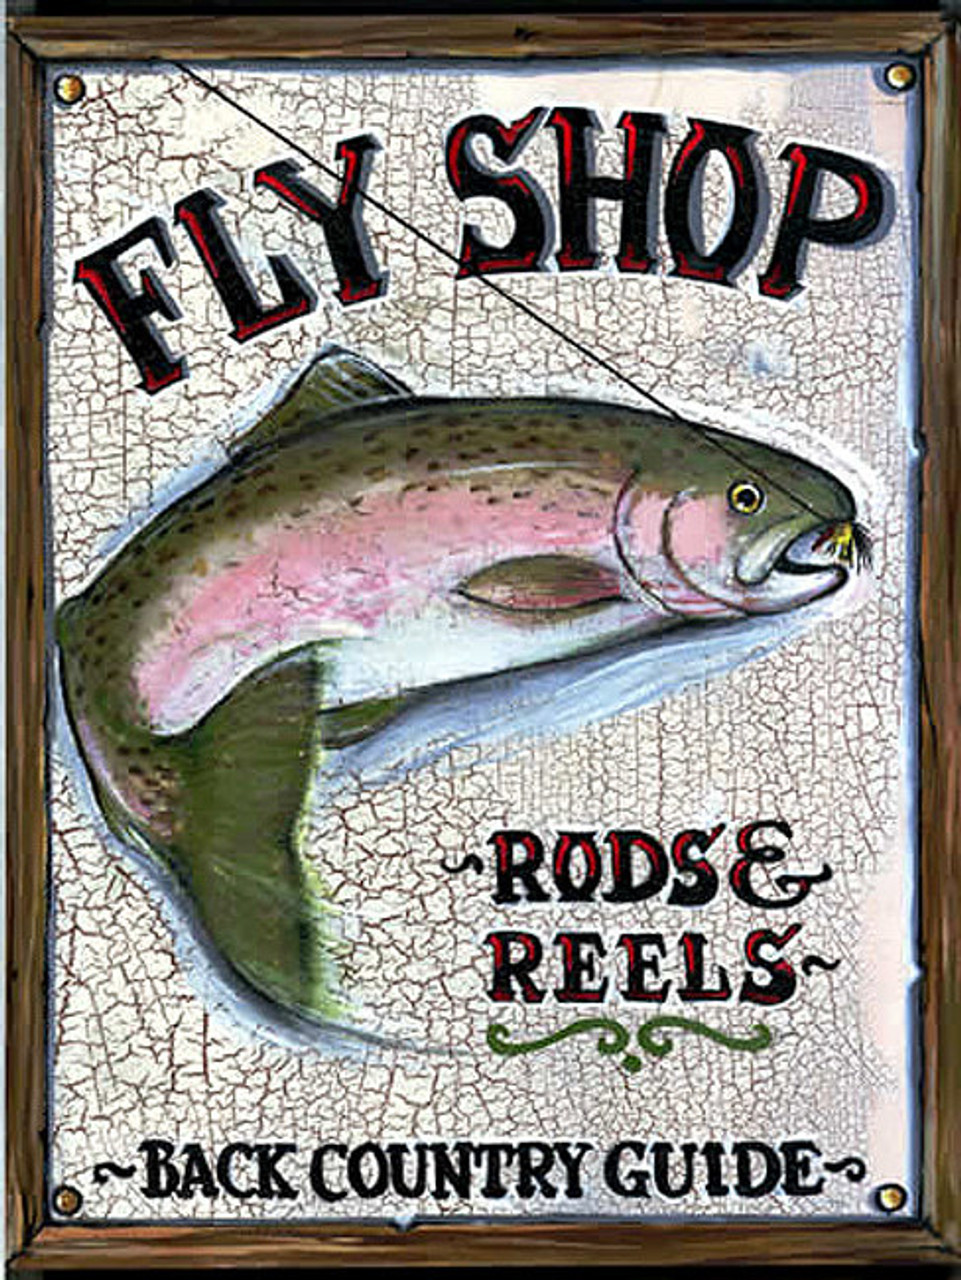 Vintage Signs - Harkers Fly Shop